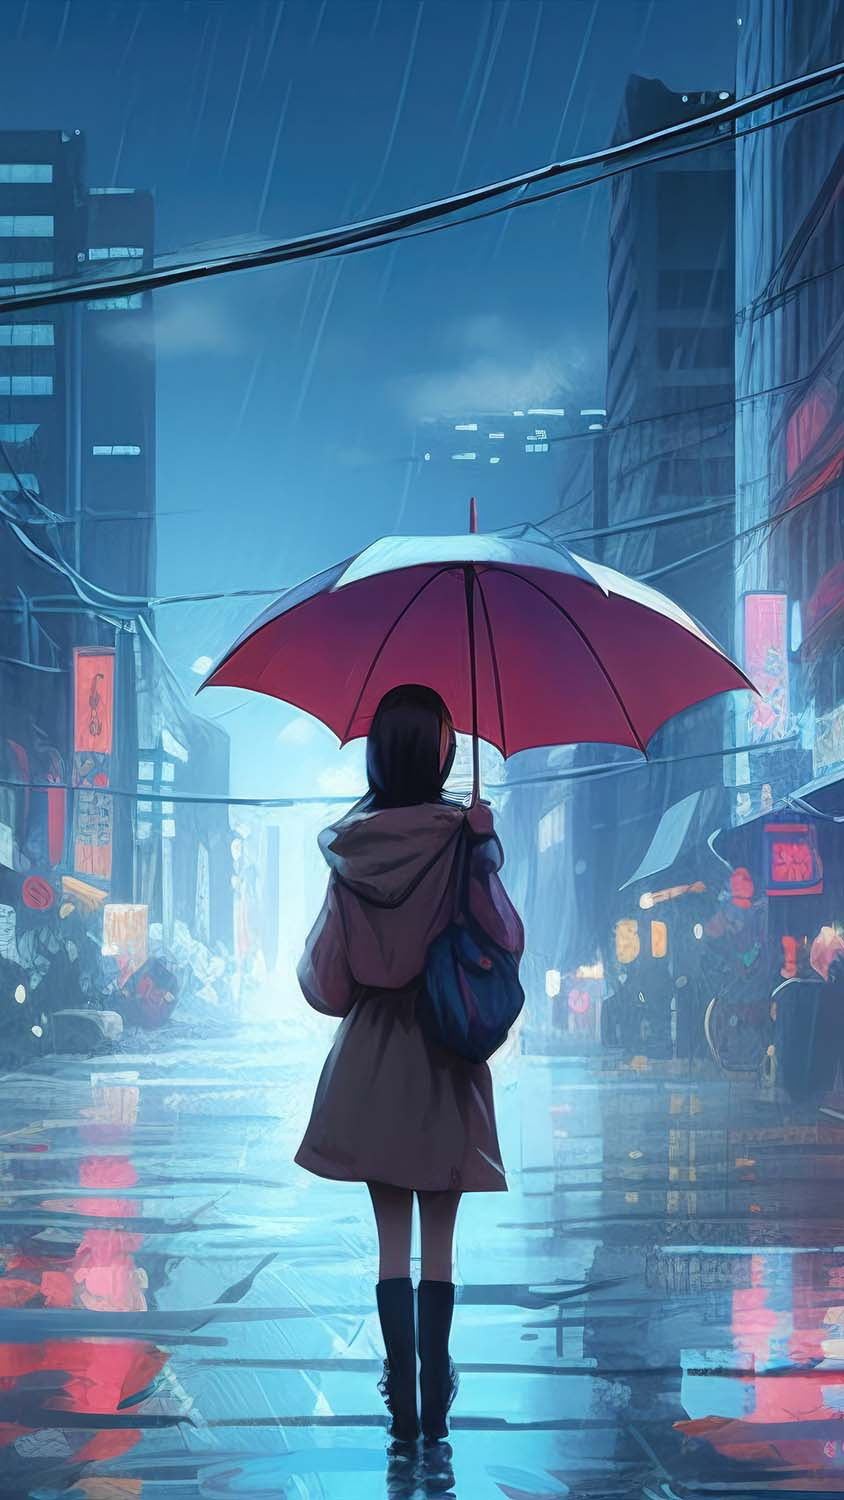 8zXKsq9r anime girls car traffic rain wallpaper Poster Paper Print   Animation  Cartoons posters in India  Buy art film design movie  music nature and educational paintingswallpapers at Flipkartcom